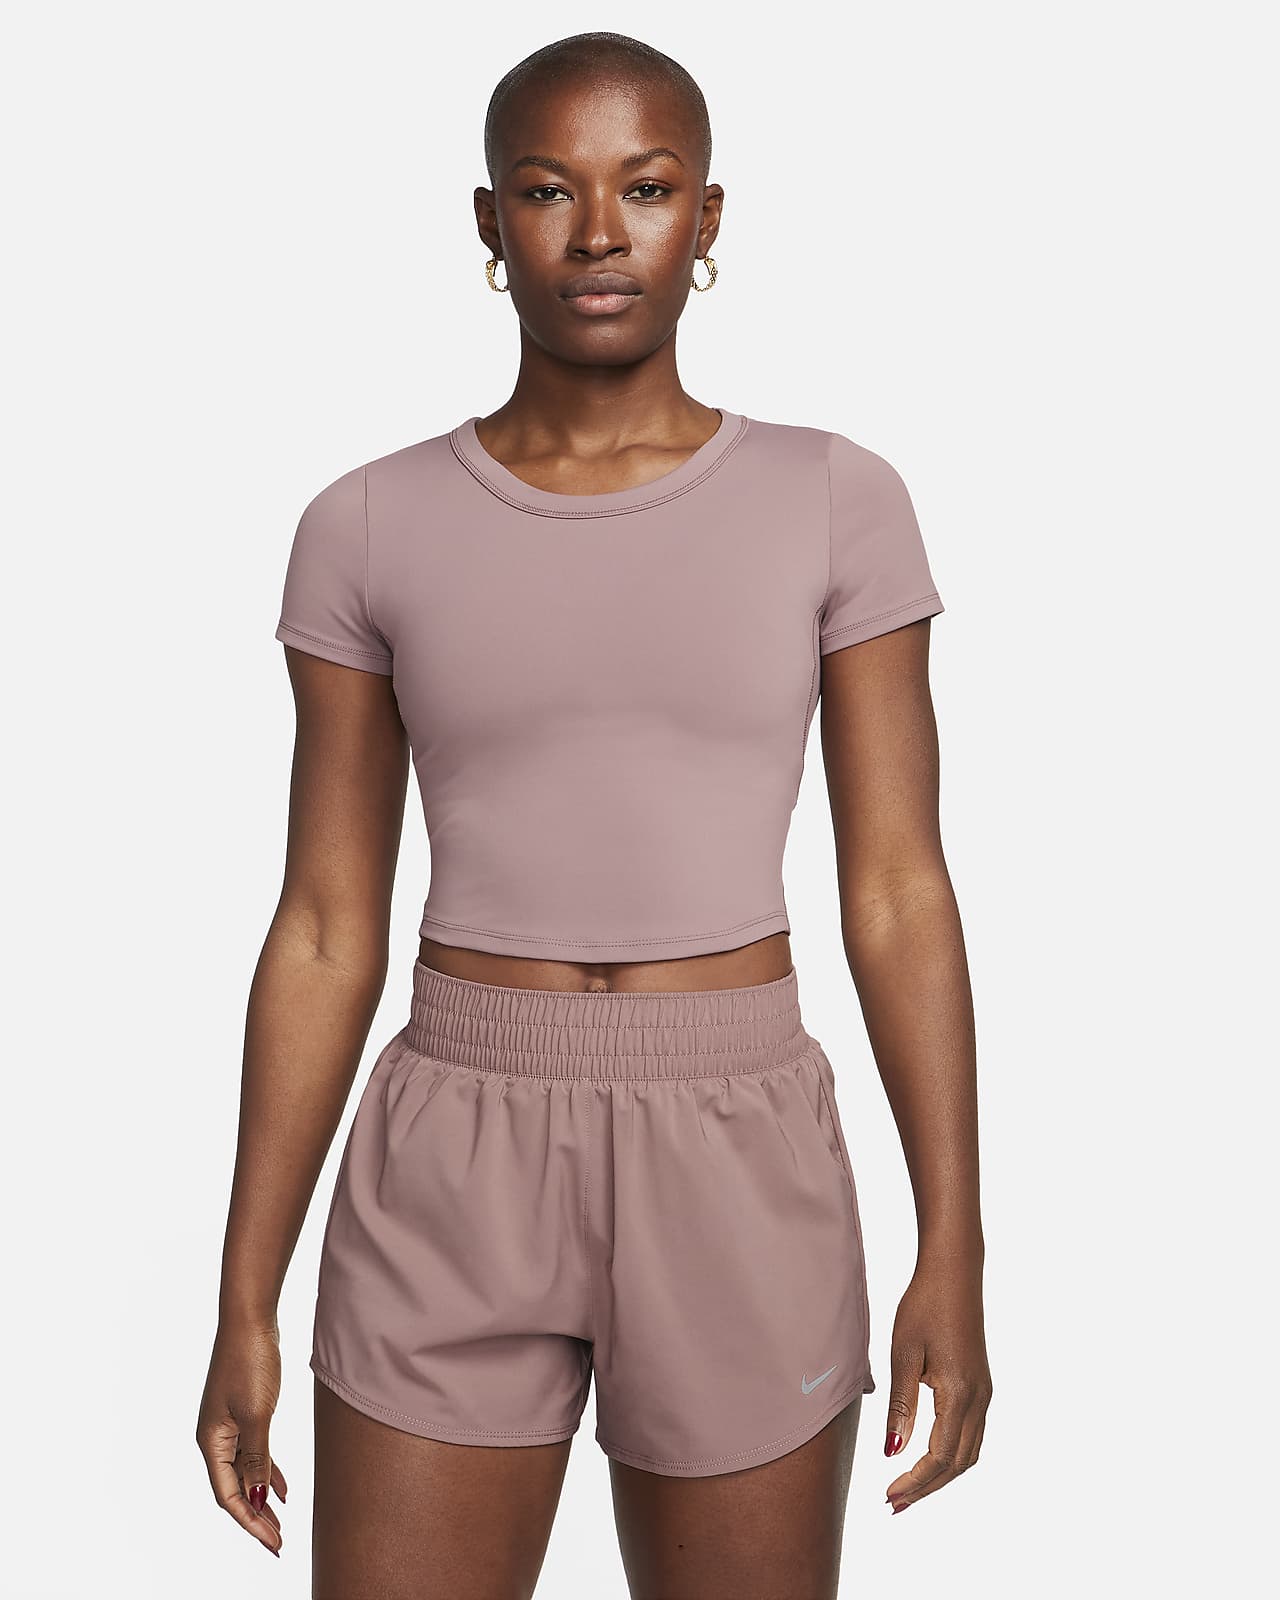 Nike One Fitted Women's Dri-FIT Short-Sleeve Cropped Top